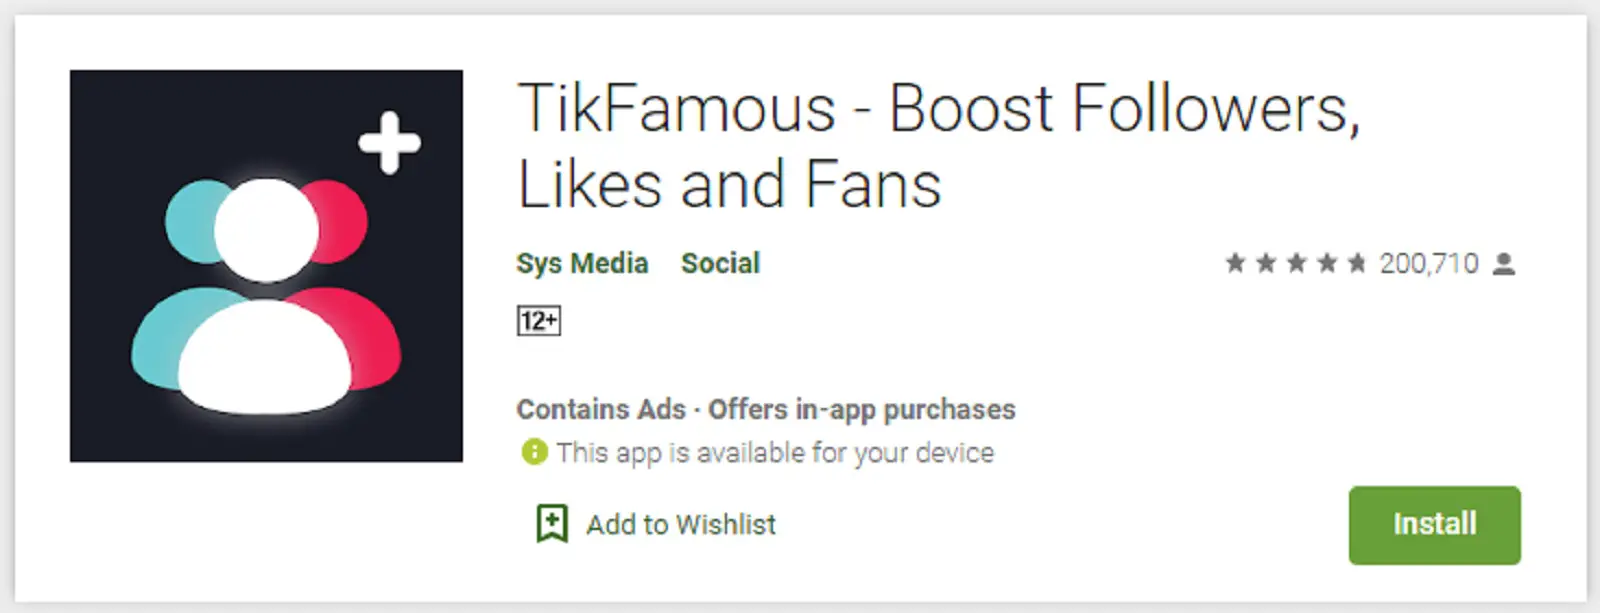 TikFamous - Boost Followers, Likes and Fans